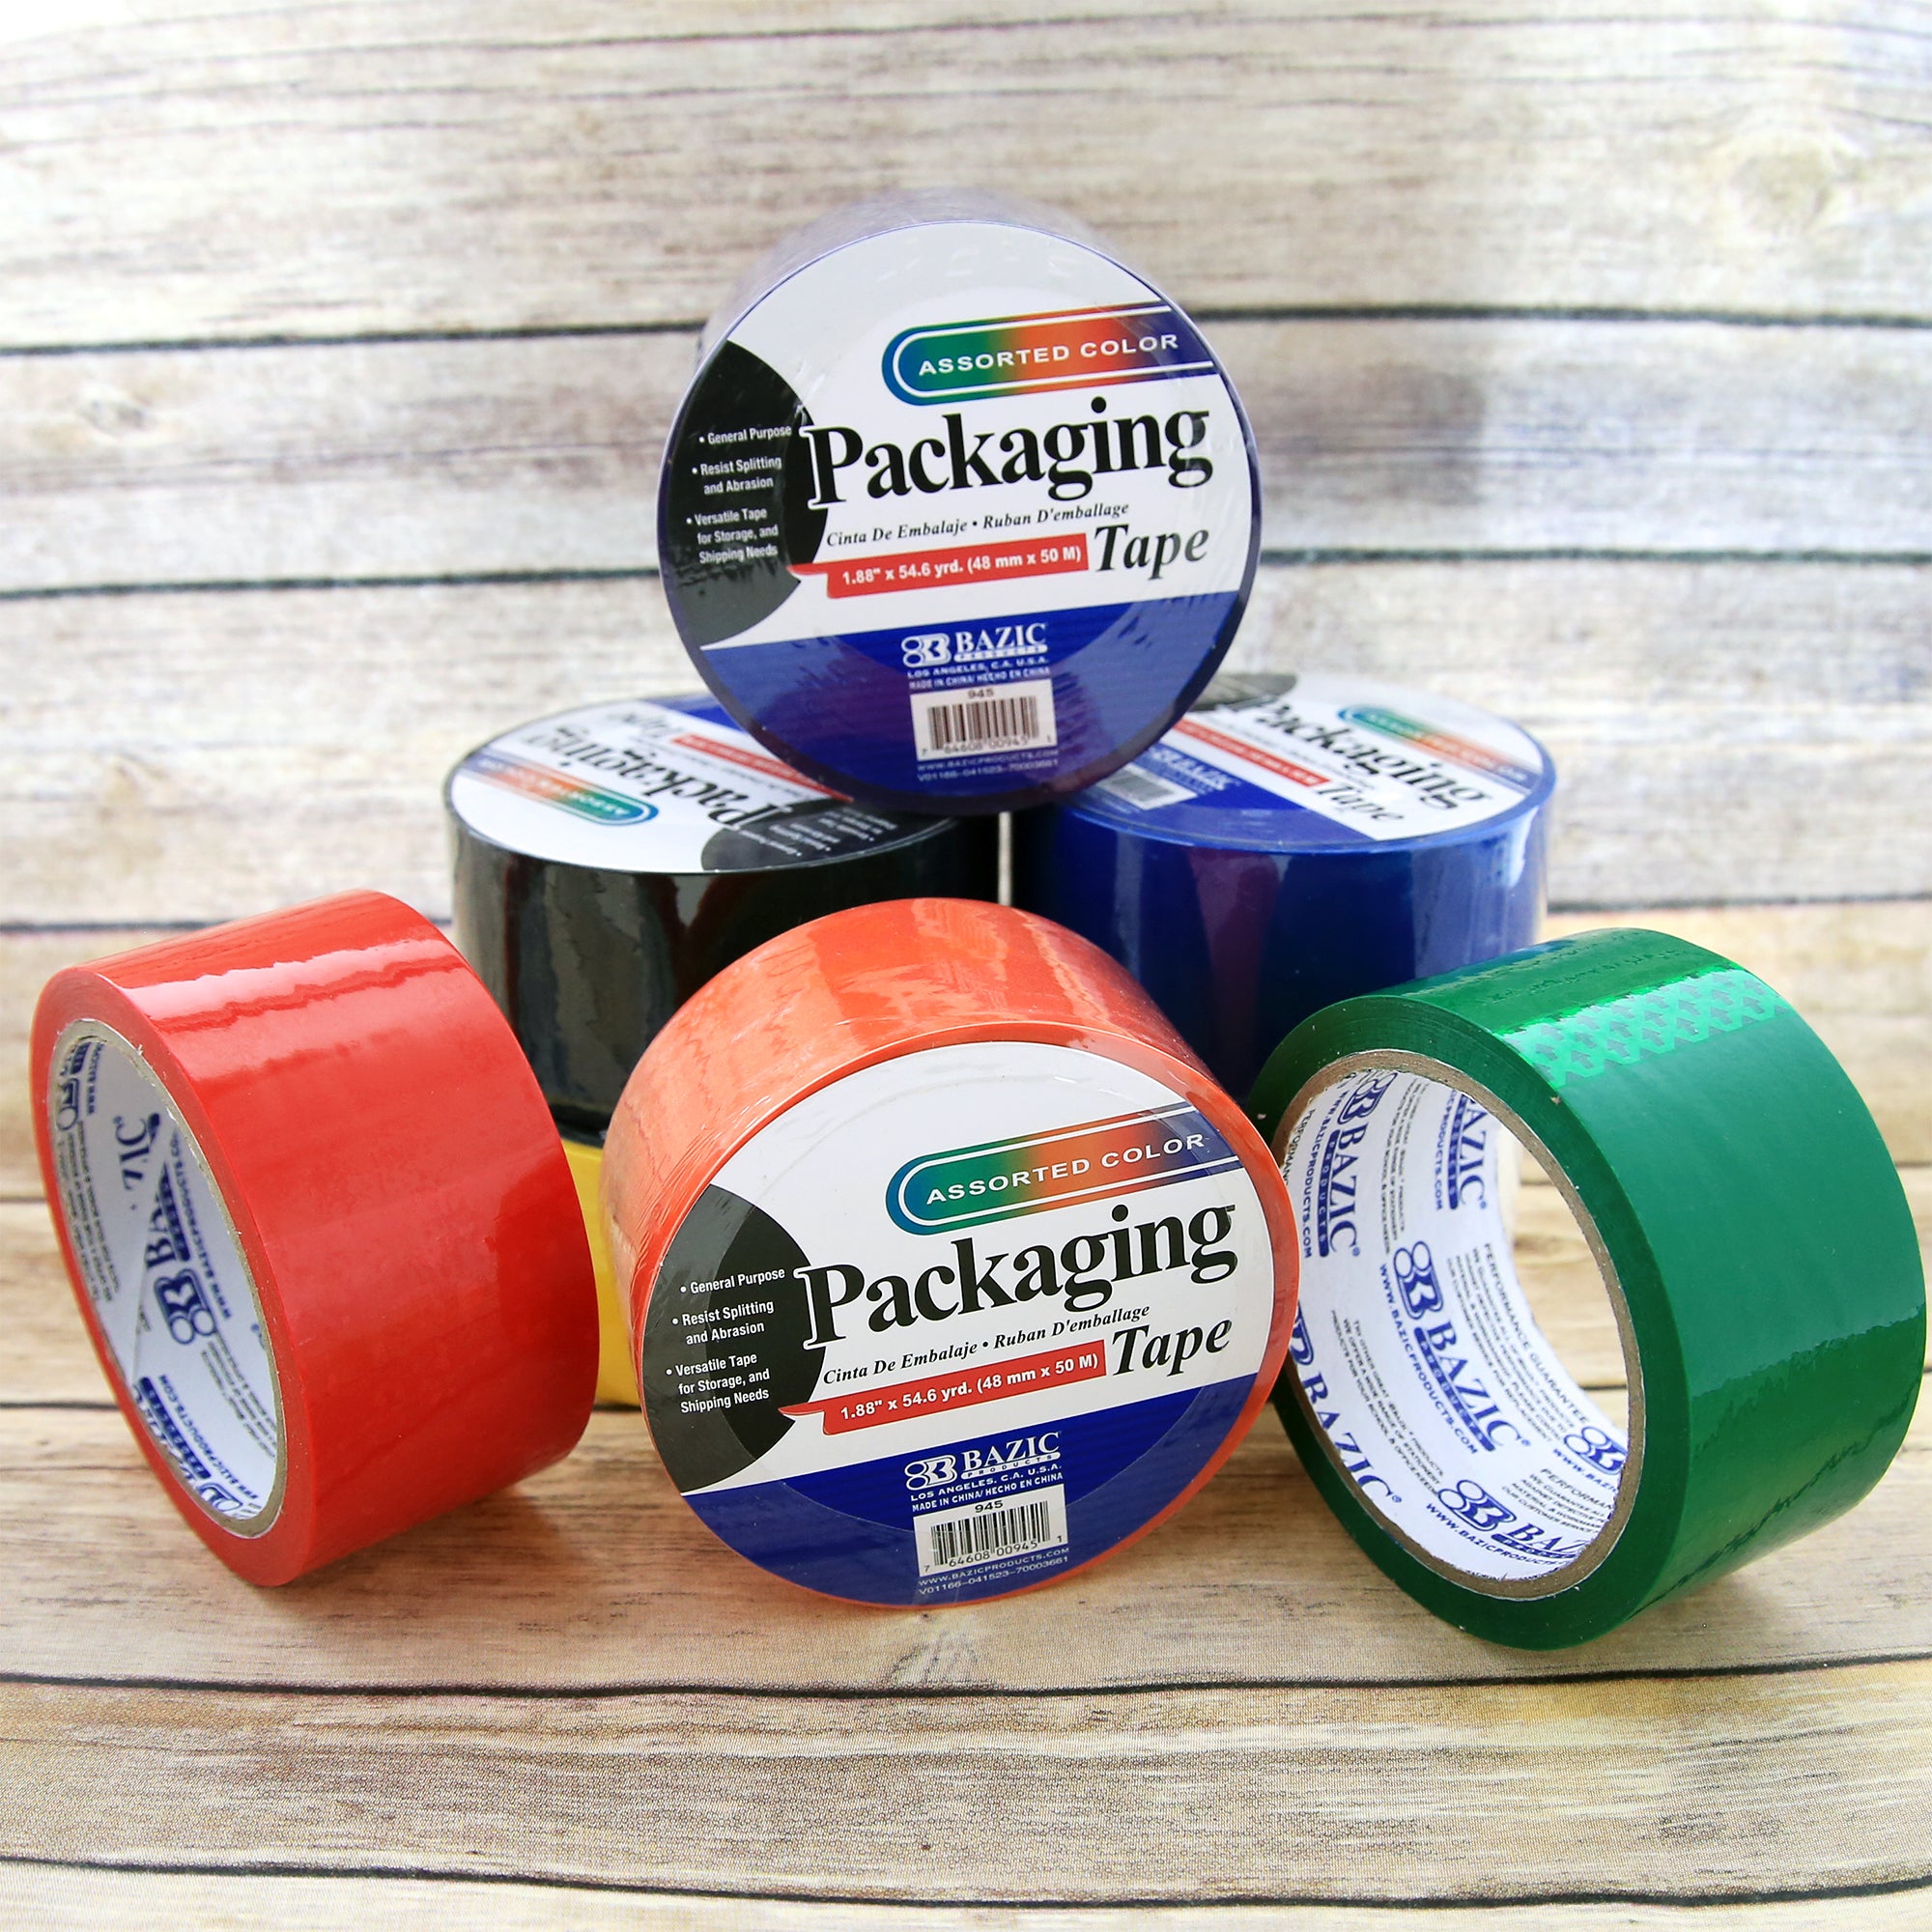 BOPP Colored Packing Adhesive Tape - China Packaging Tape, Stationery Tape